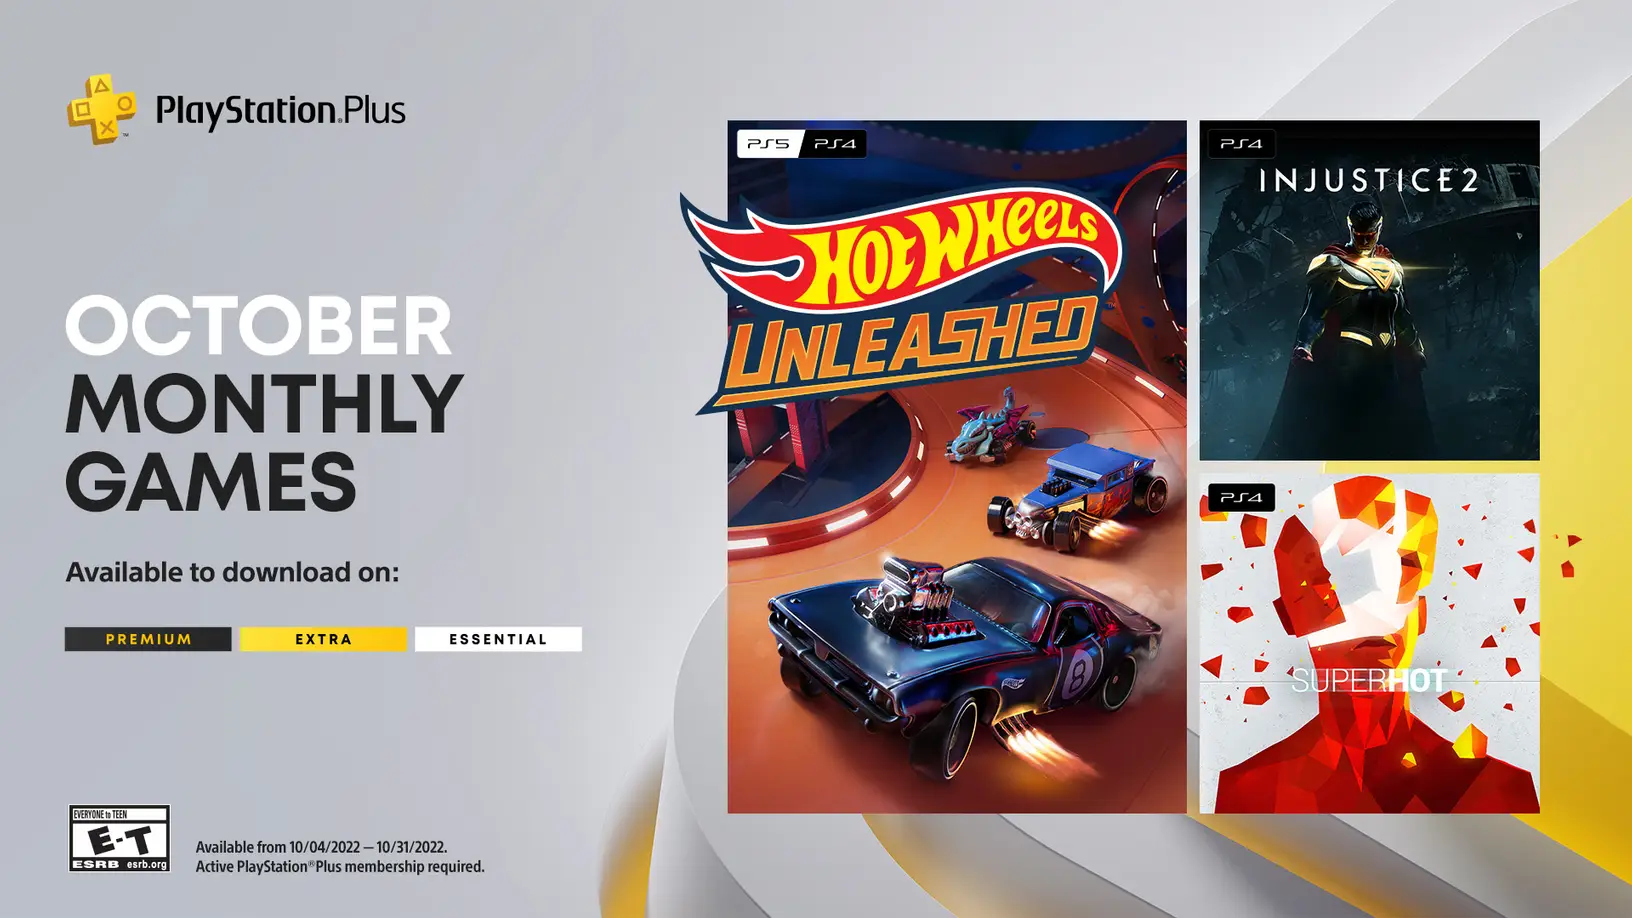 PlayStation Plus Games for October 2022 include Hot Wheels and